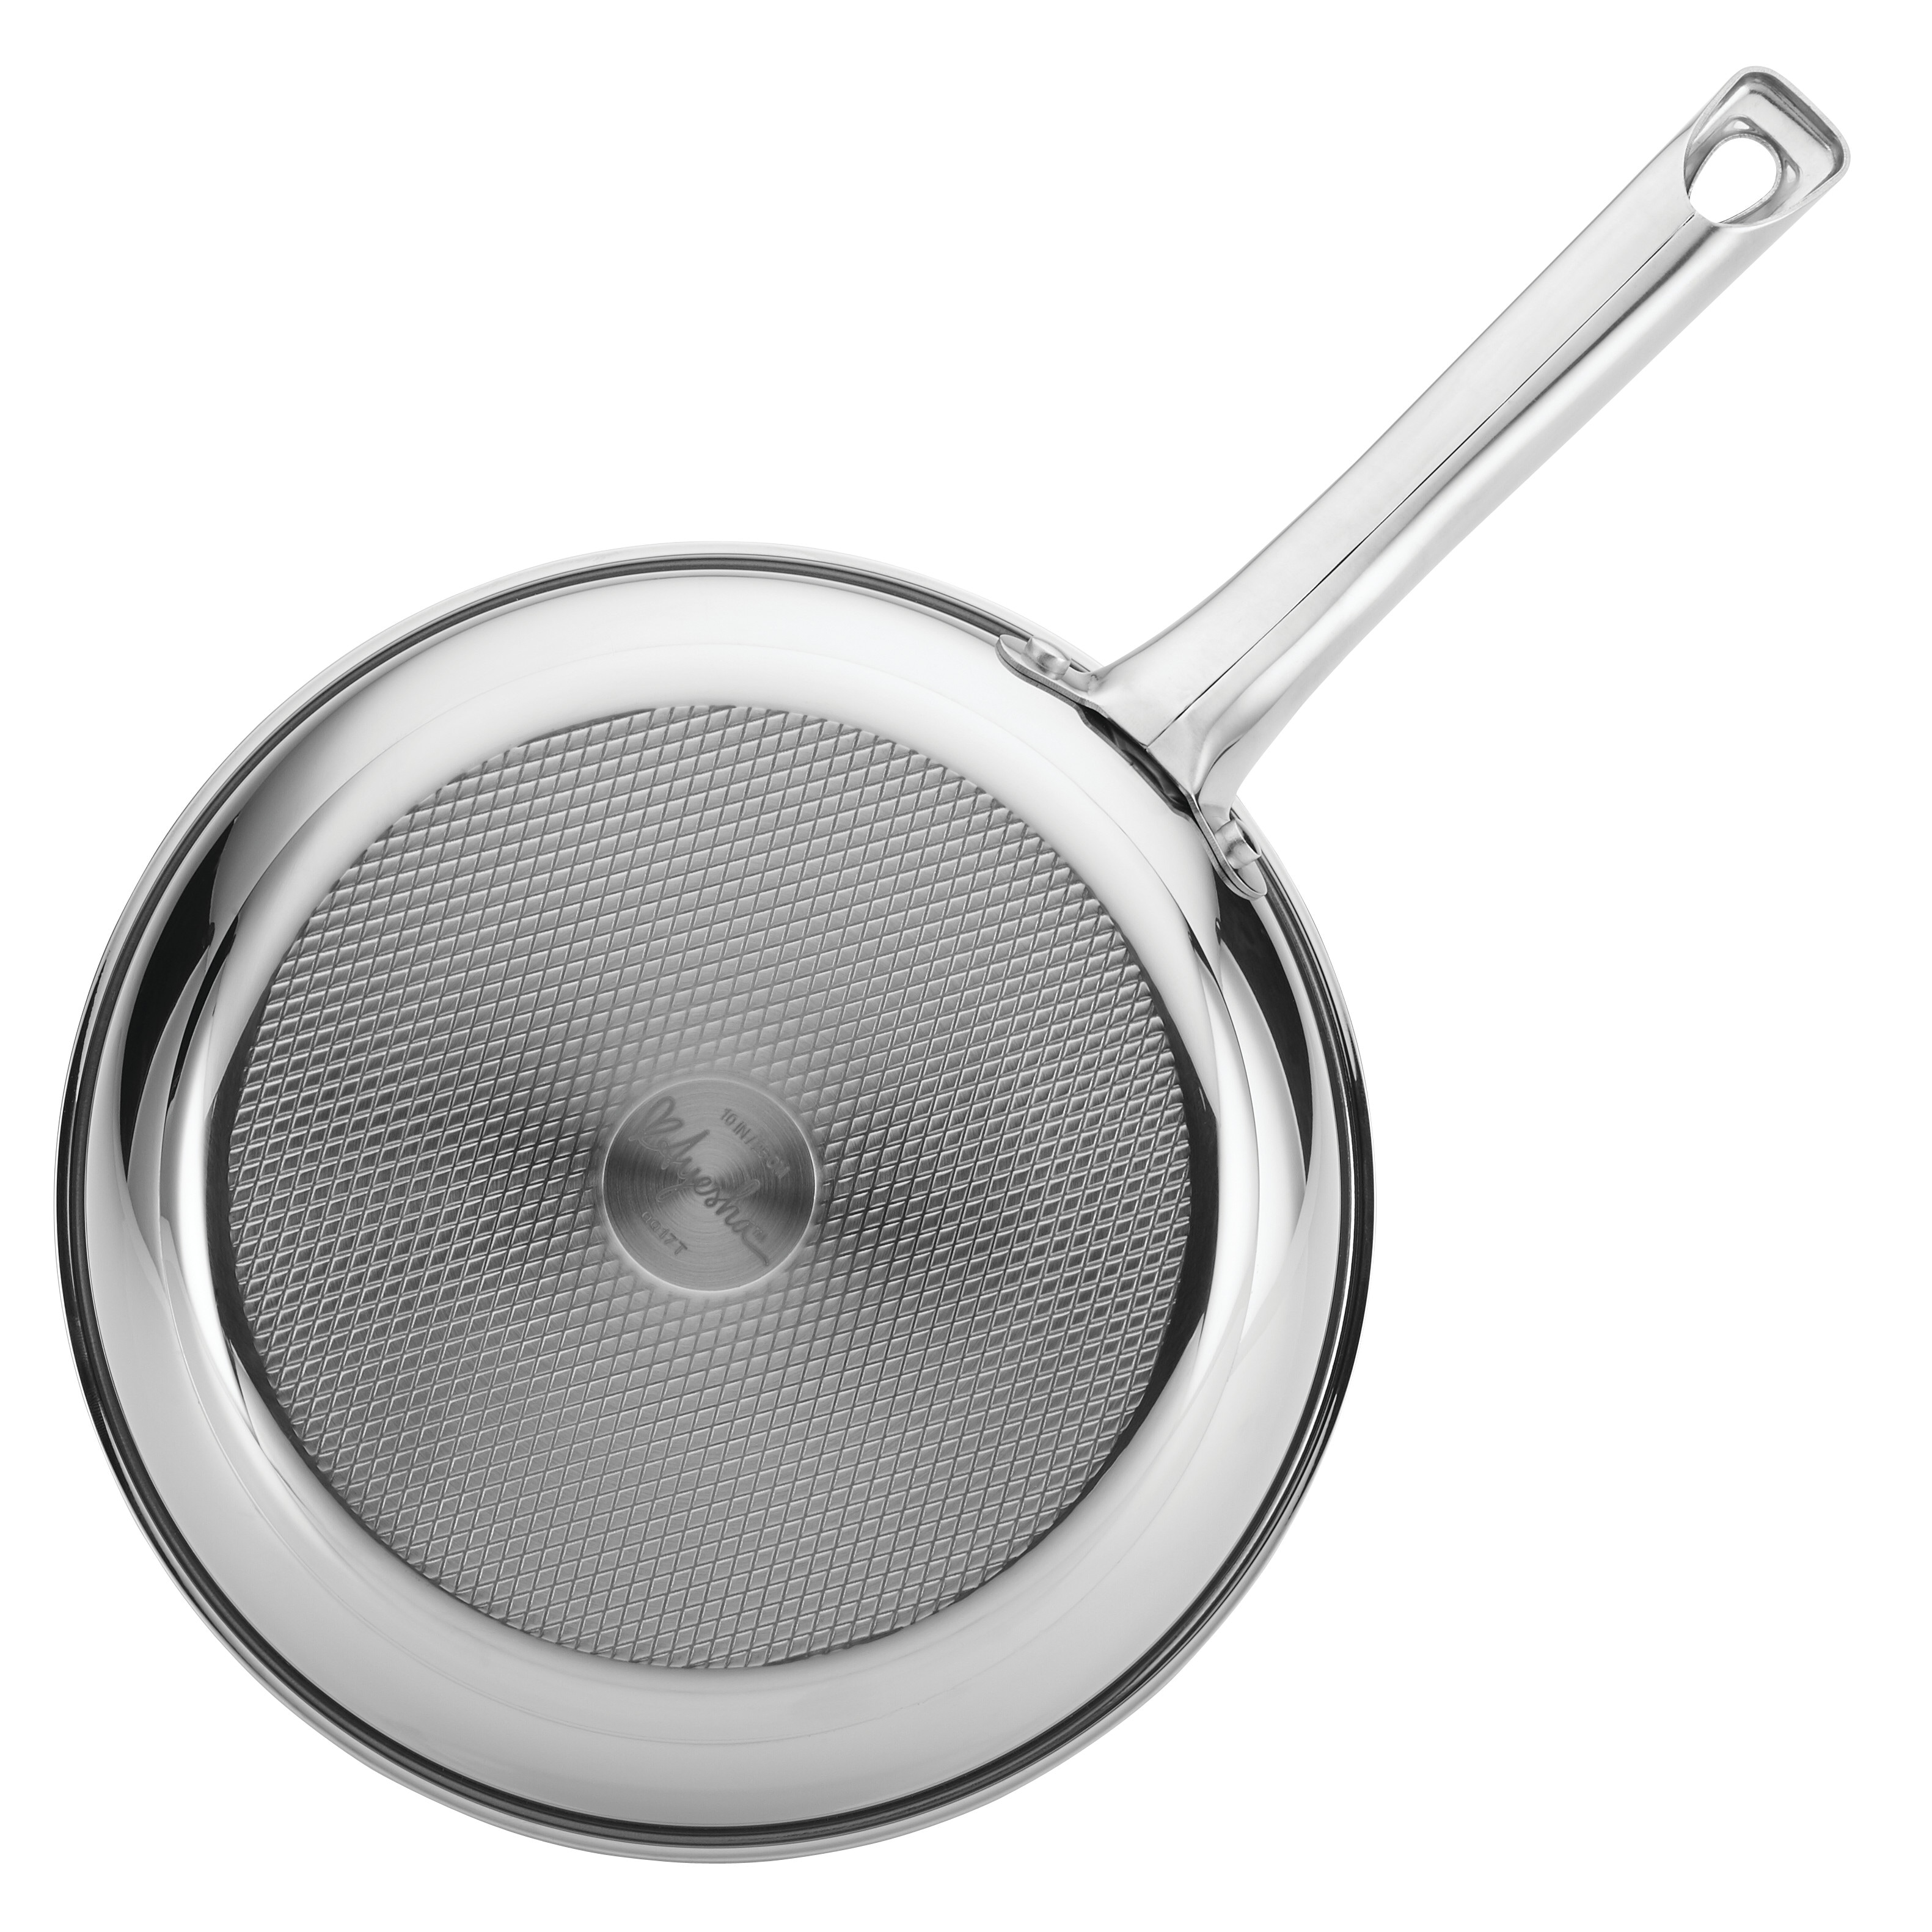 https://ak1.ostkcdn.com/images/products/is/images/direct/f4afaba84eefc37d48186240f29d9364bcd1930f/Ayesha-Curry-Home-Collection-Stainless-Steel-Cookware-Set%2C-9-Piece.jpg